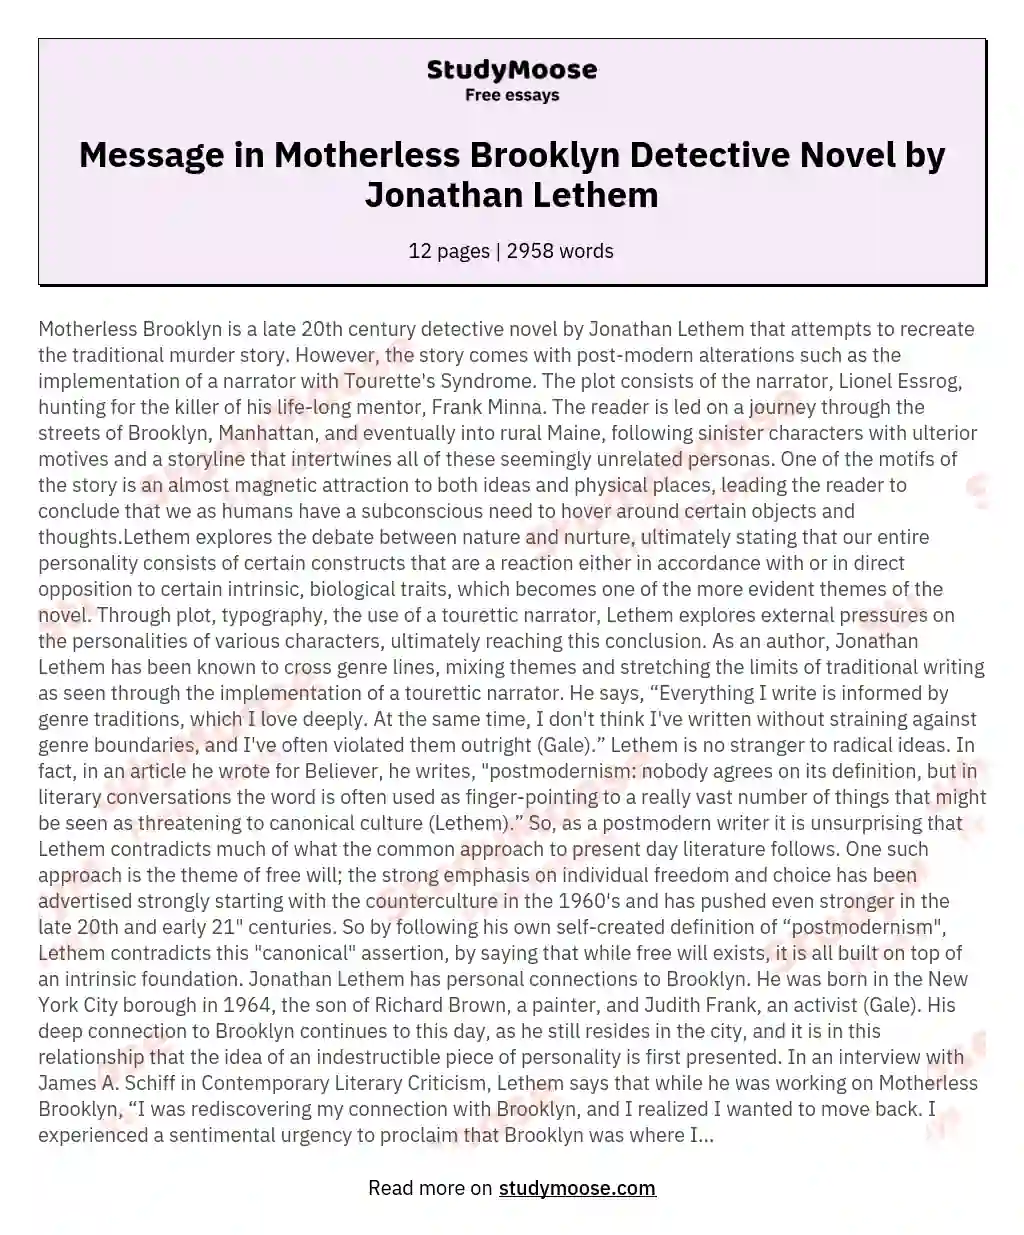 An Analysis of the Plot and Message in the Detective Novel Motherless Brooklyn by Jonathan Lethem